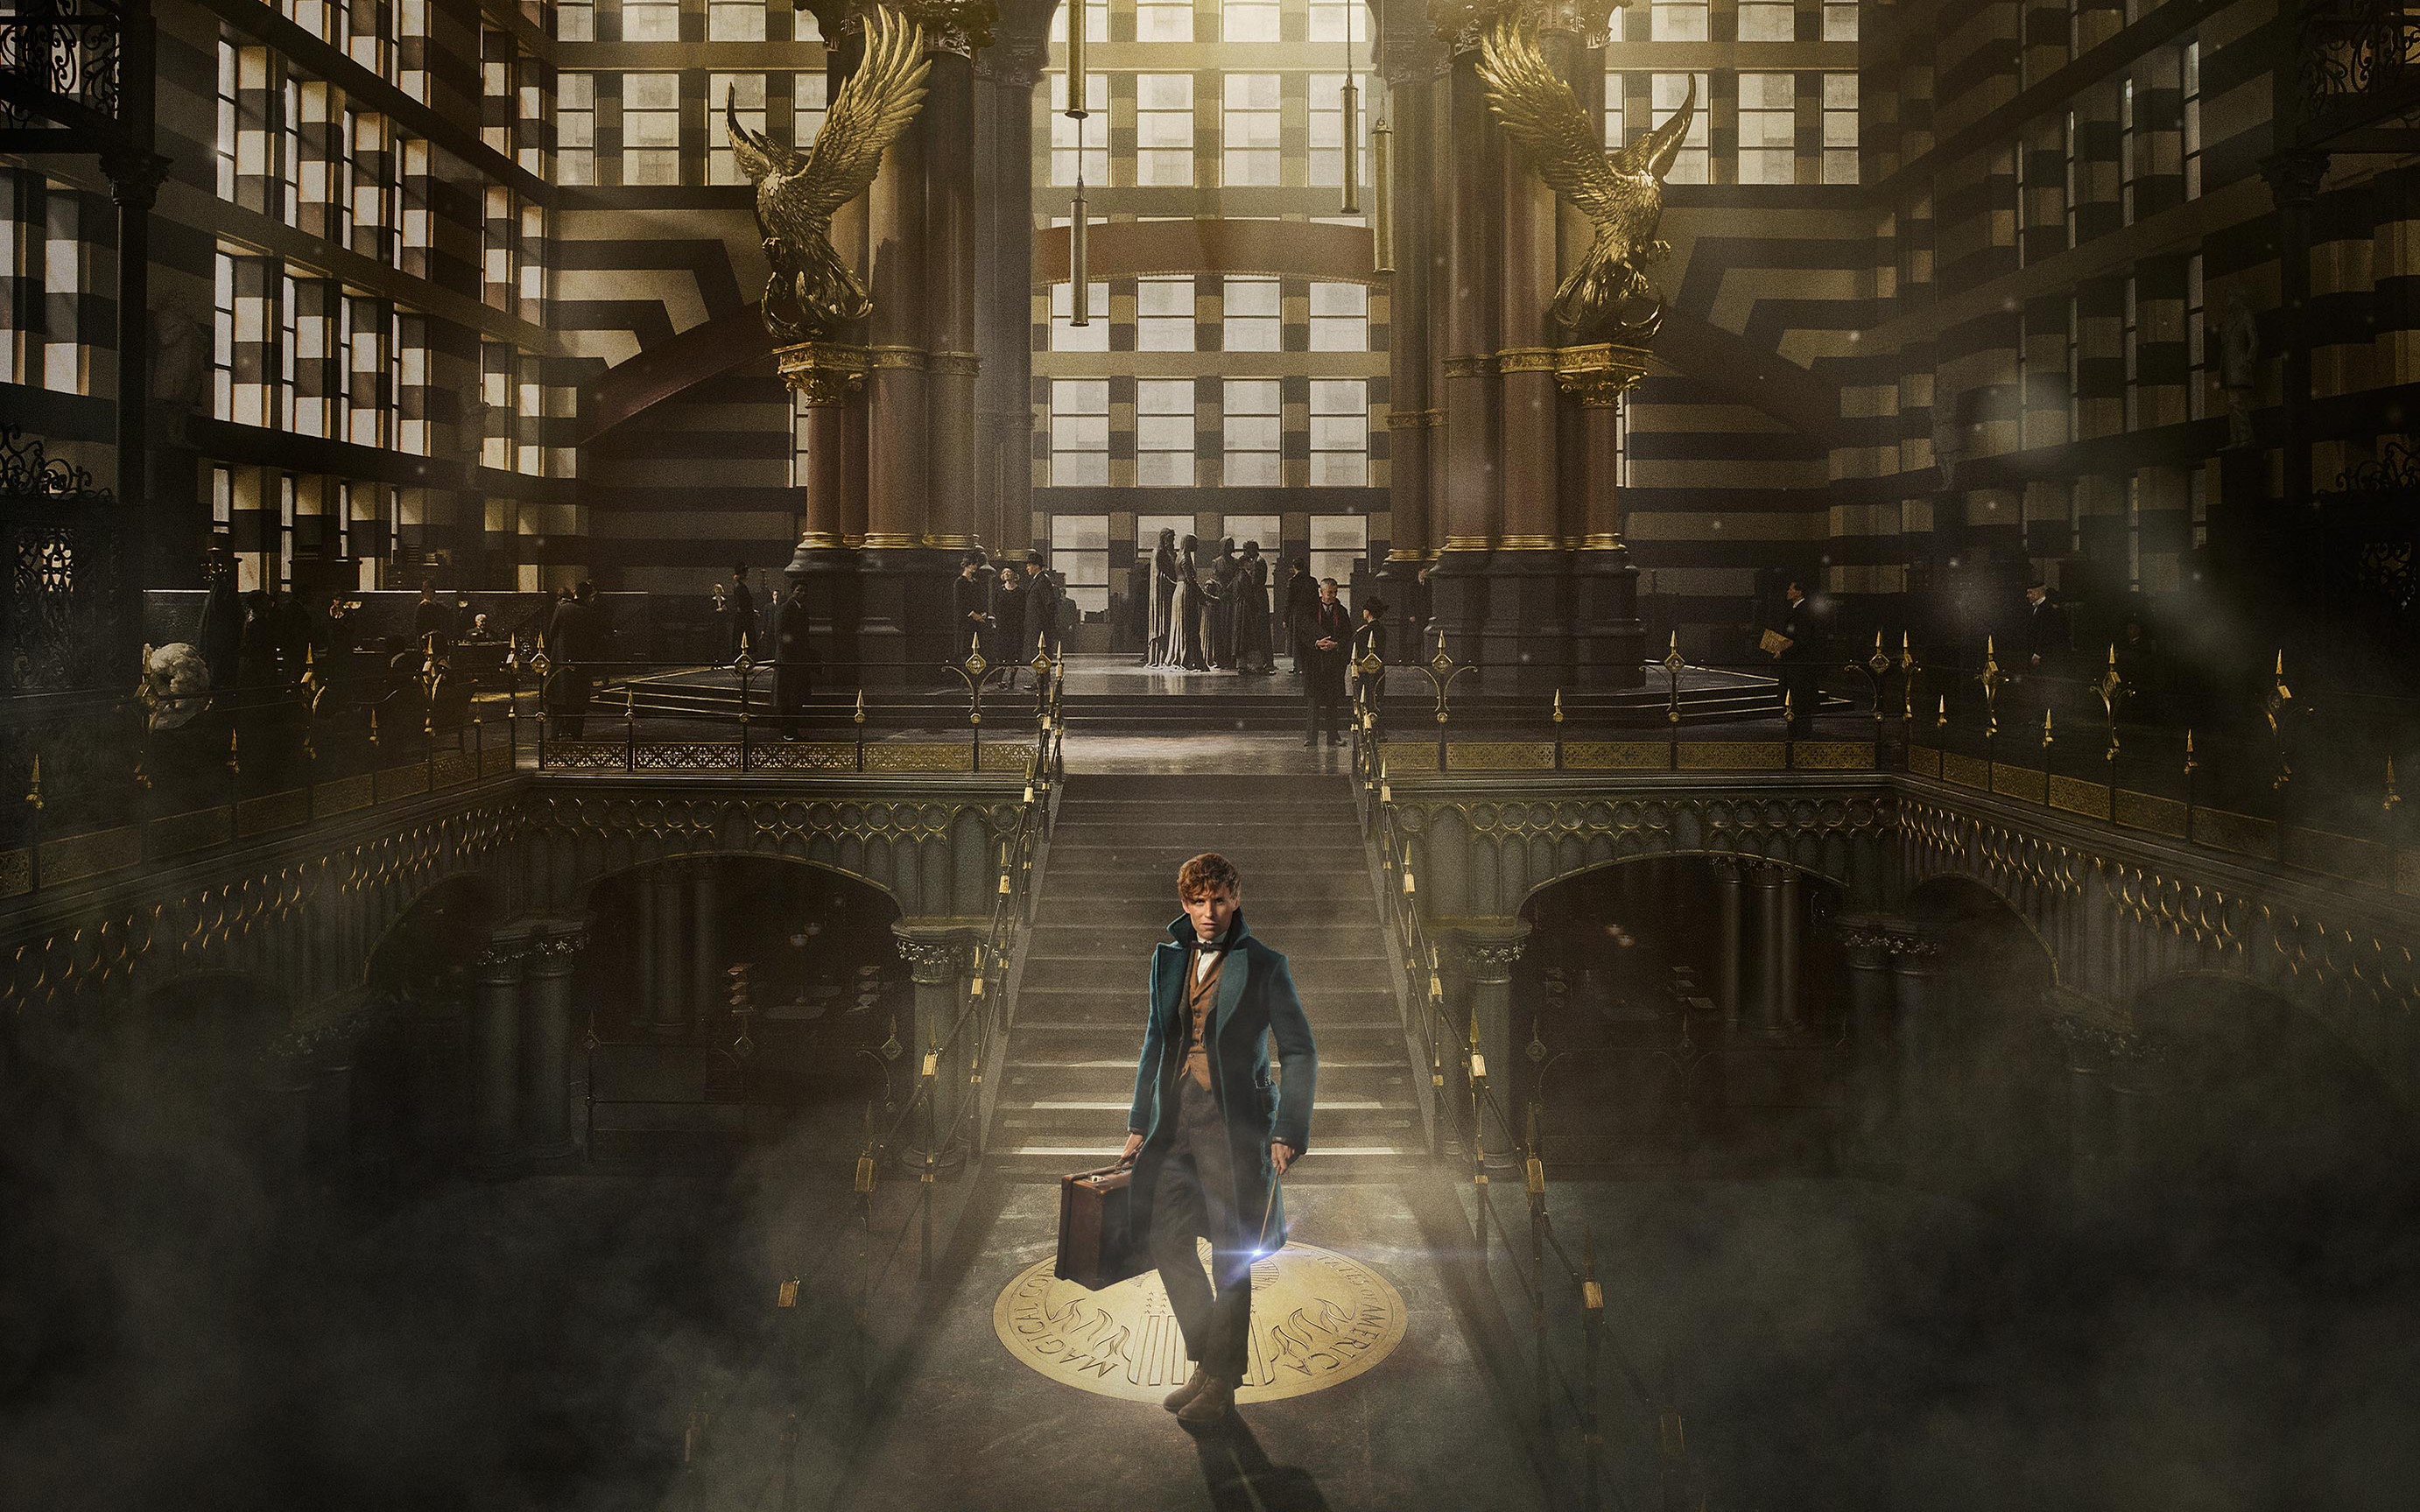 Eddie Redmayne Fantastic Beasts And Where To Find Them Harry Potter Ministry Of Magic Newt Scamander 2764x1727